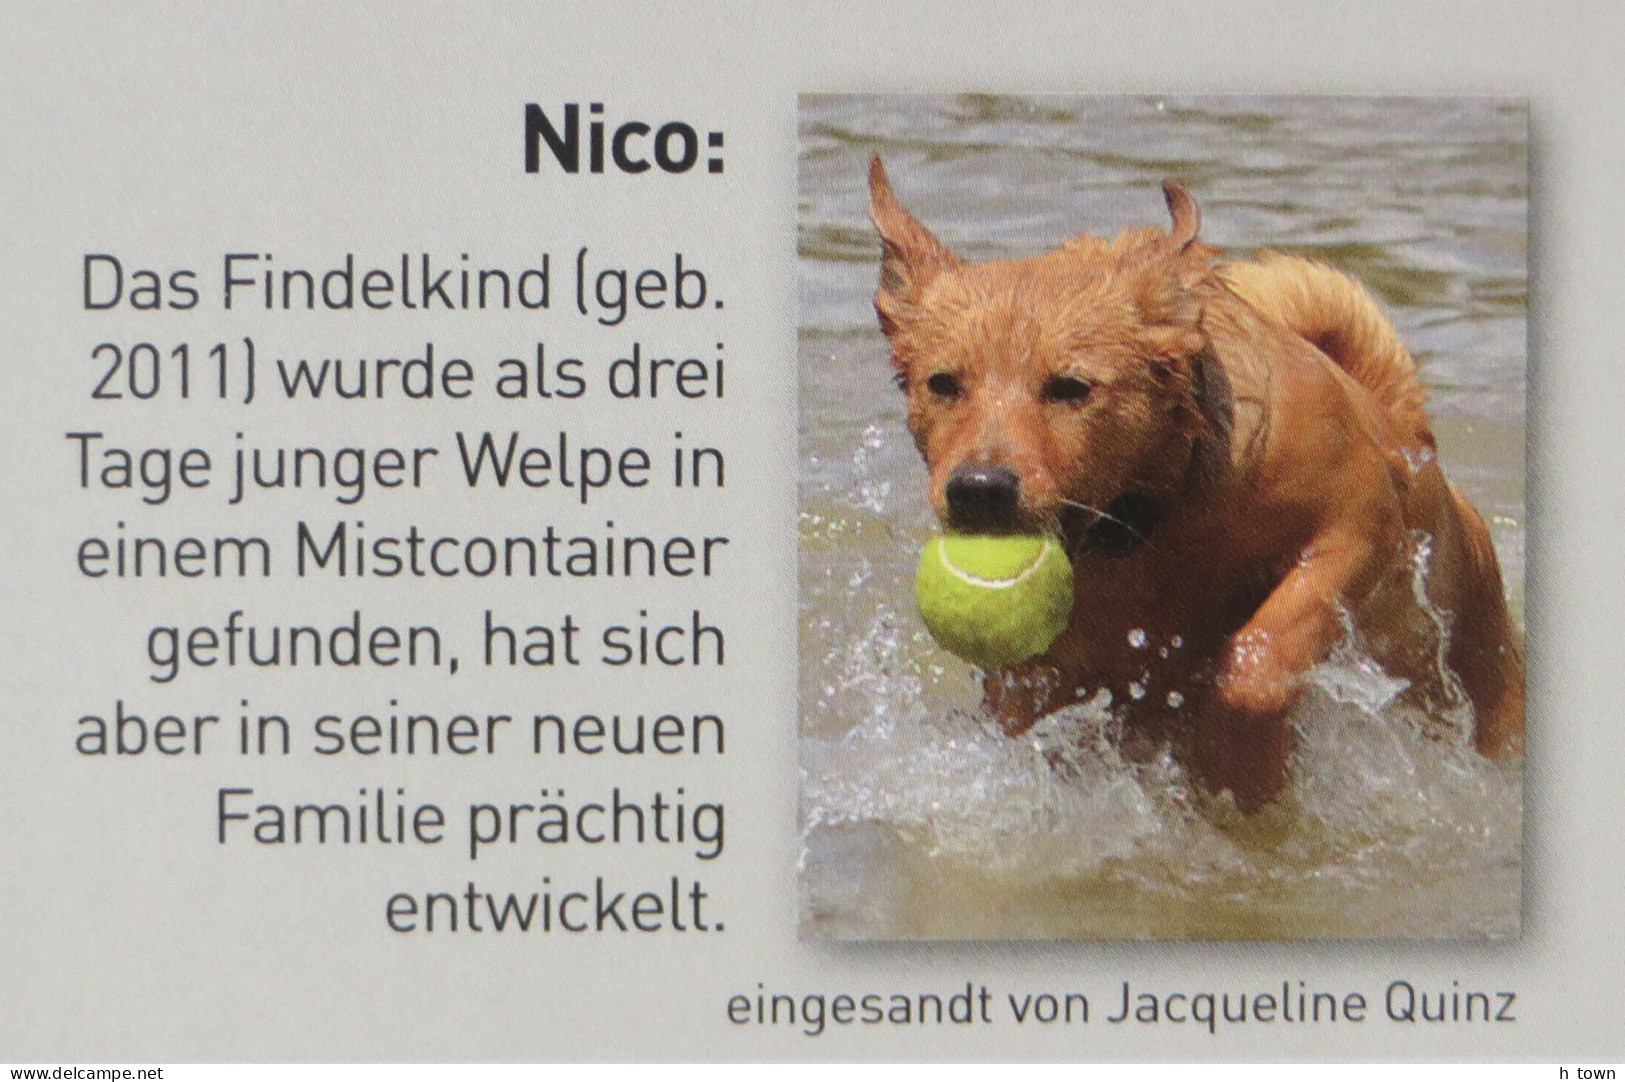 335  Chiens: carnet de timbres pers. d'Autriche - Dogs: booklet of "Personalized" Stamps from Austria. Tennis Ball